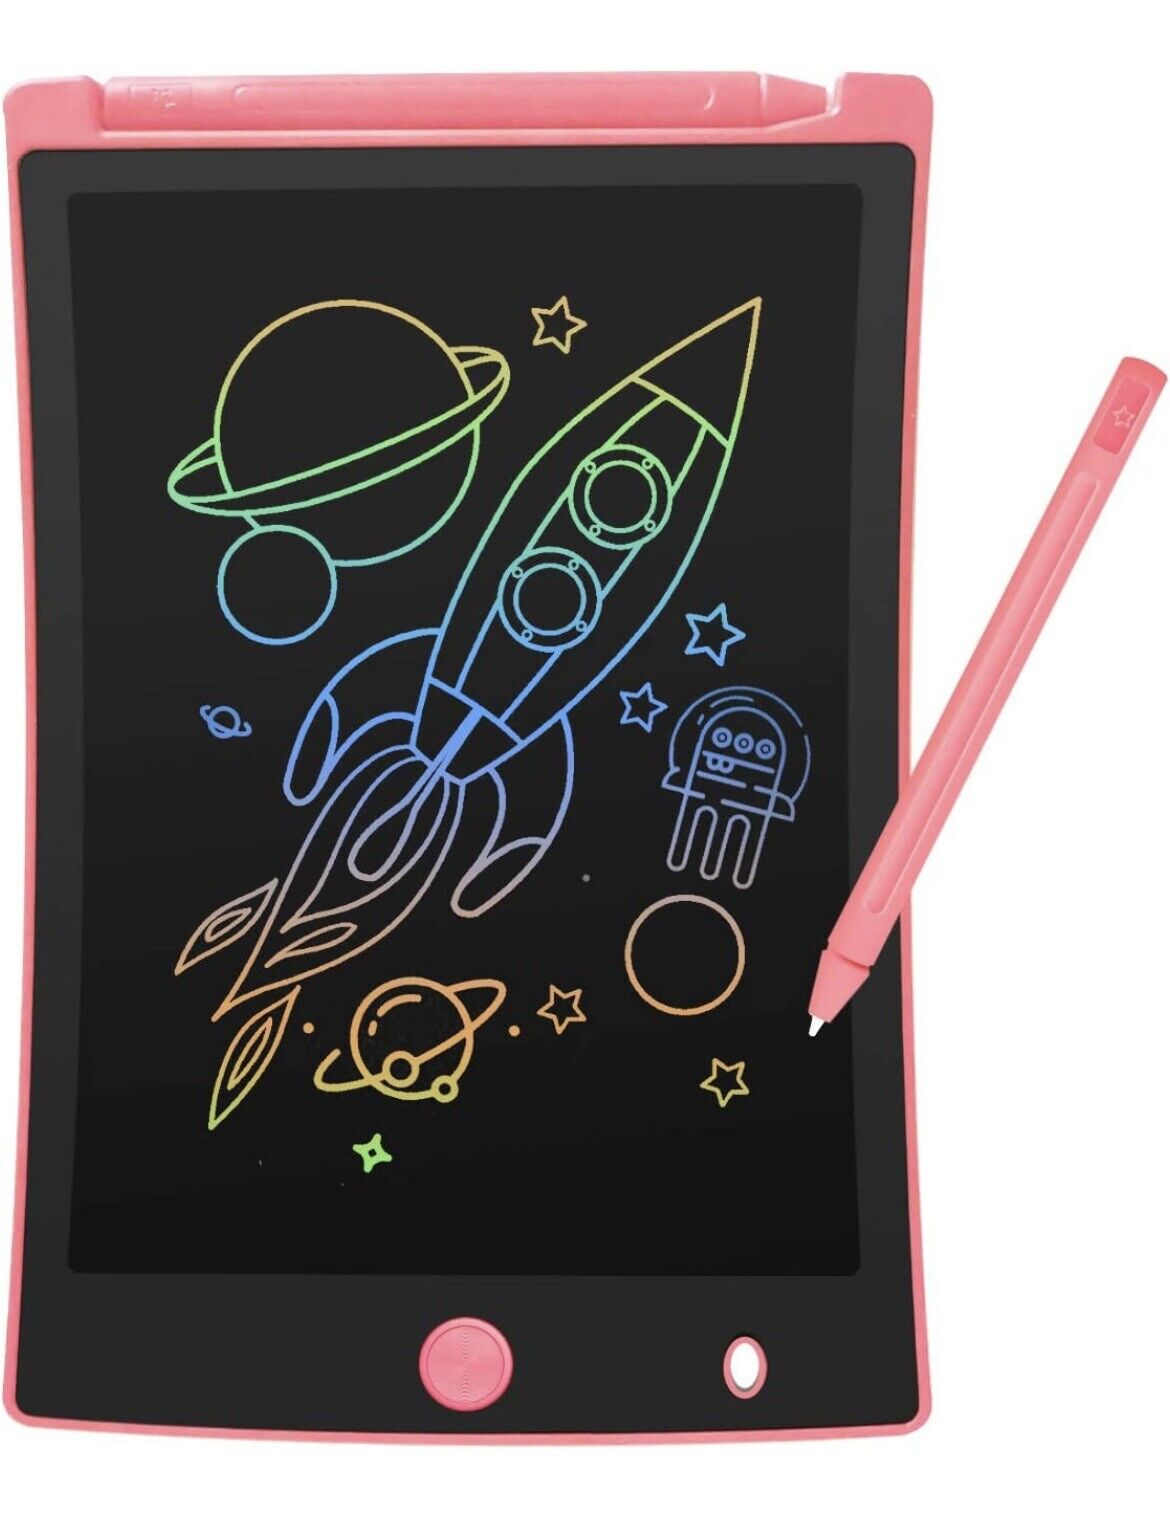 Colorful 8.5 Inch LCD Writing Screen For Kids Of All Ages Doodle Board